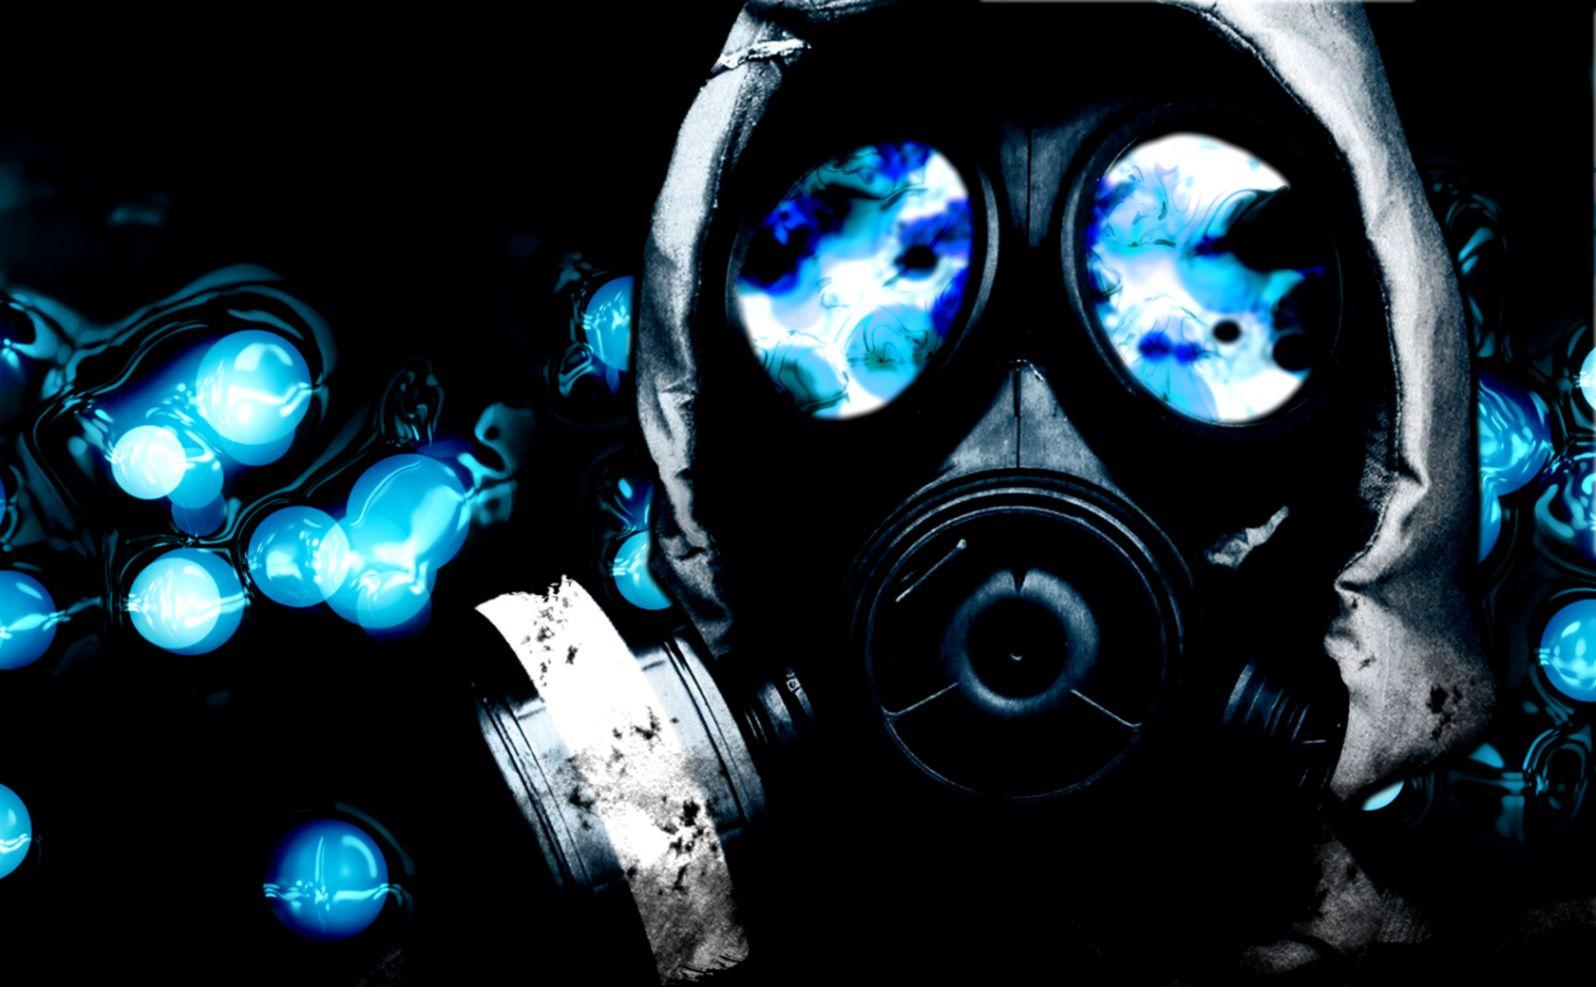 Cool Skull With Gas Mask Wallpaper